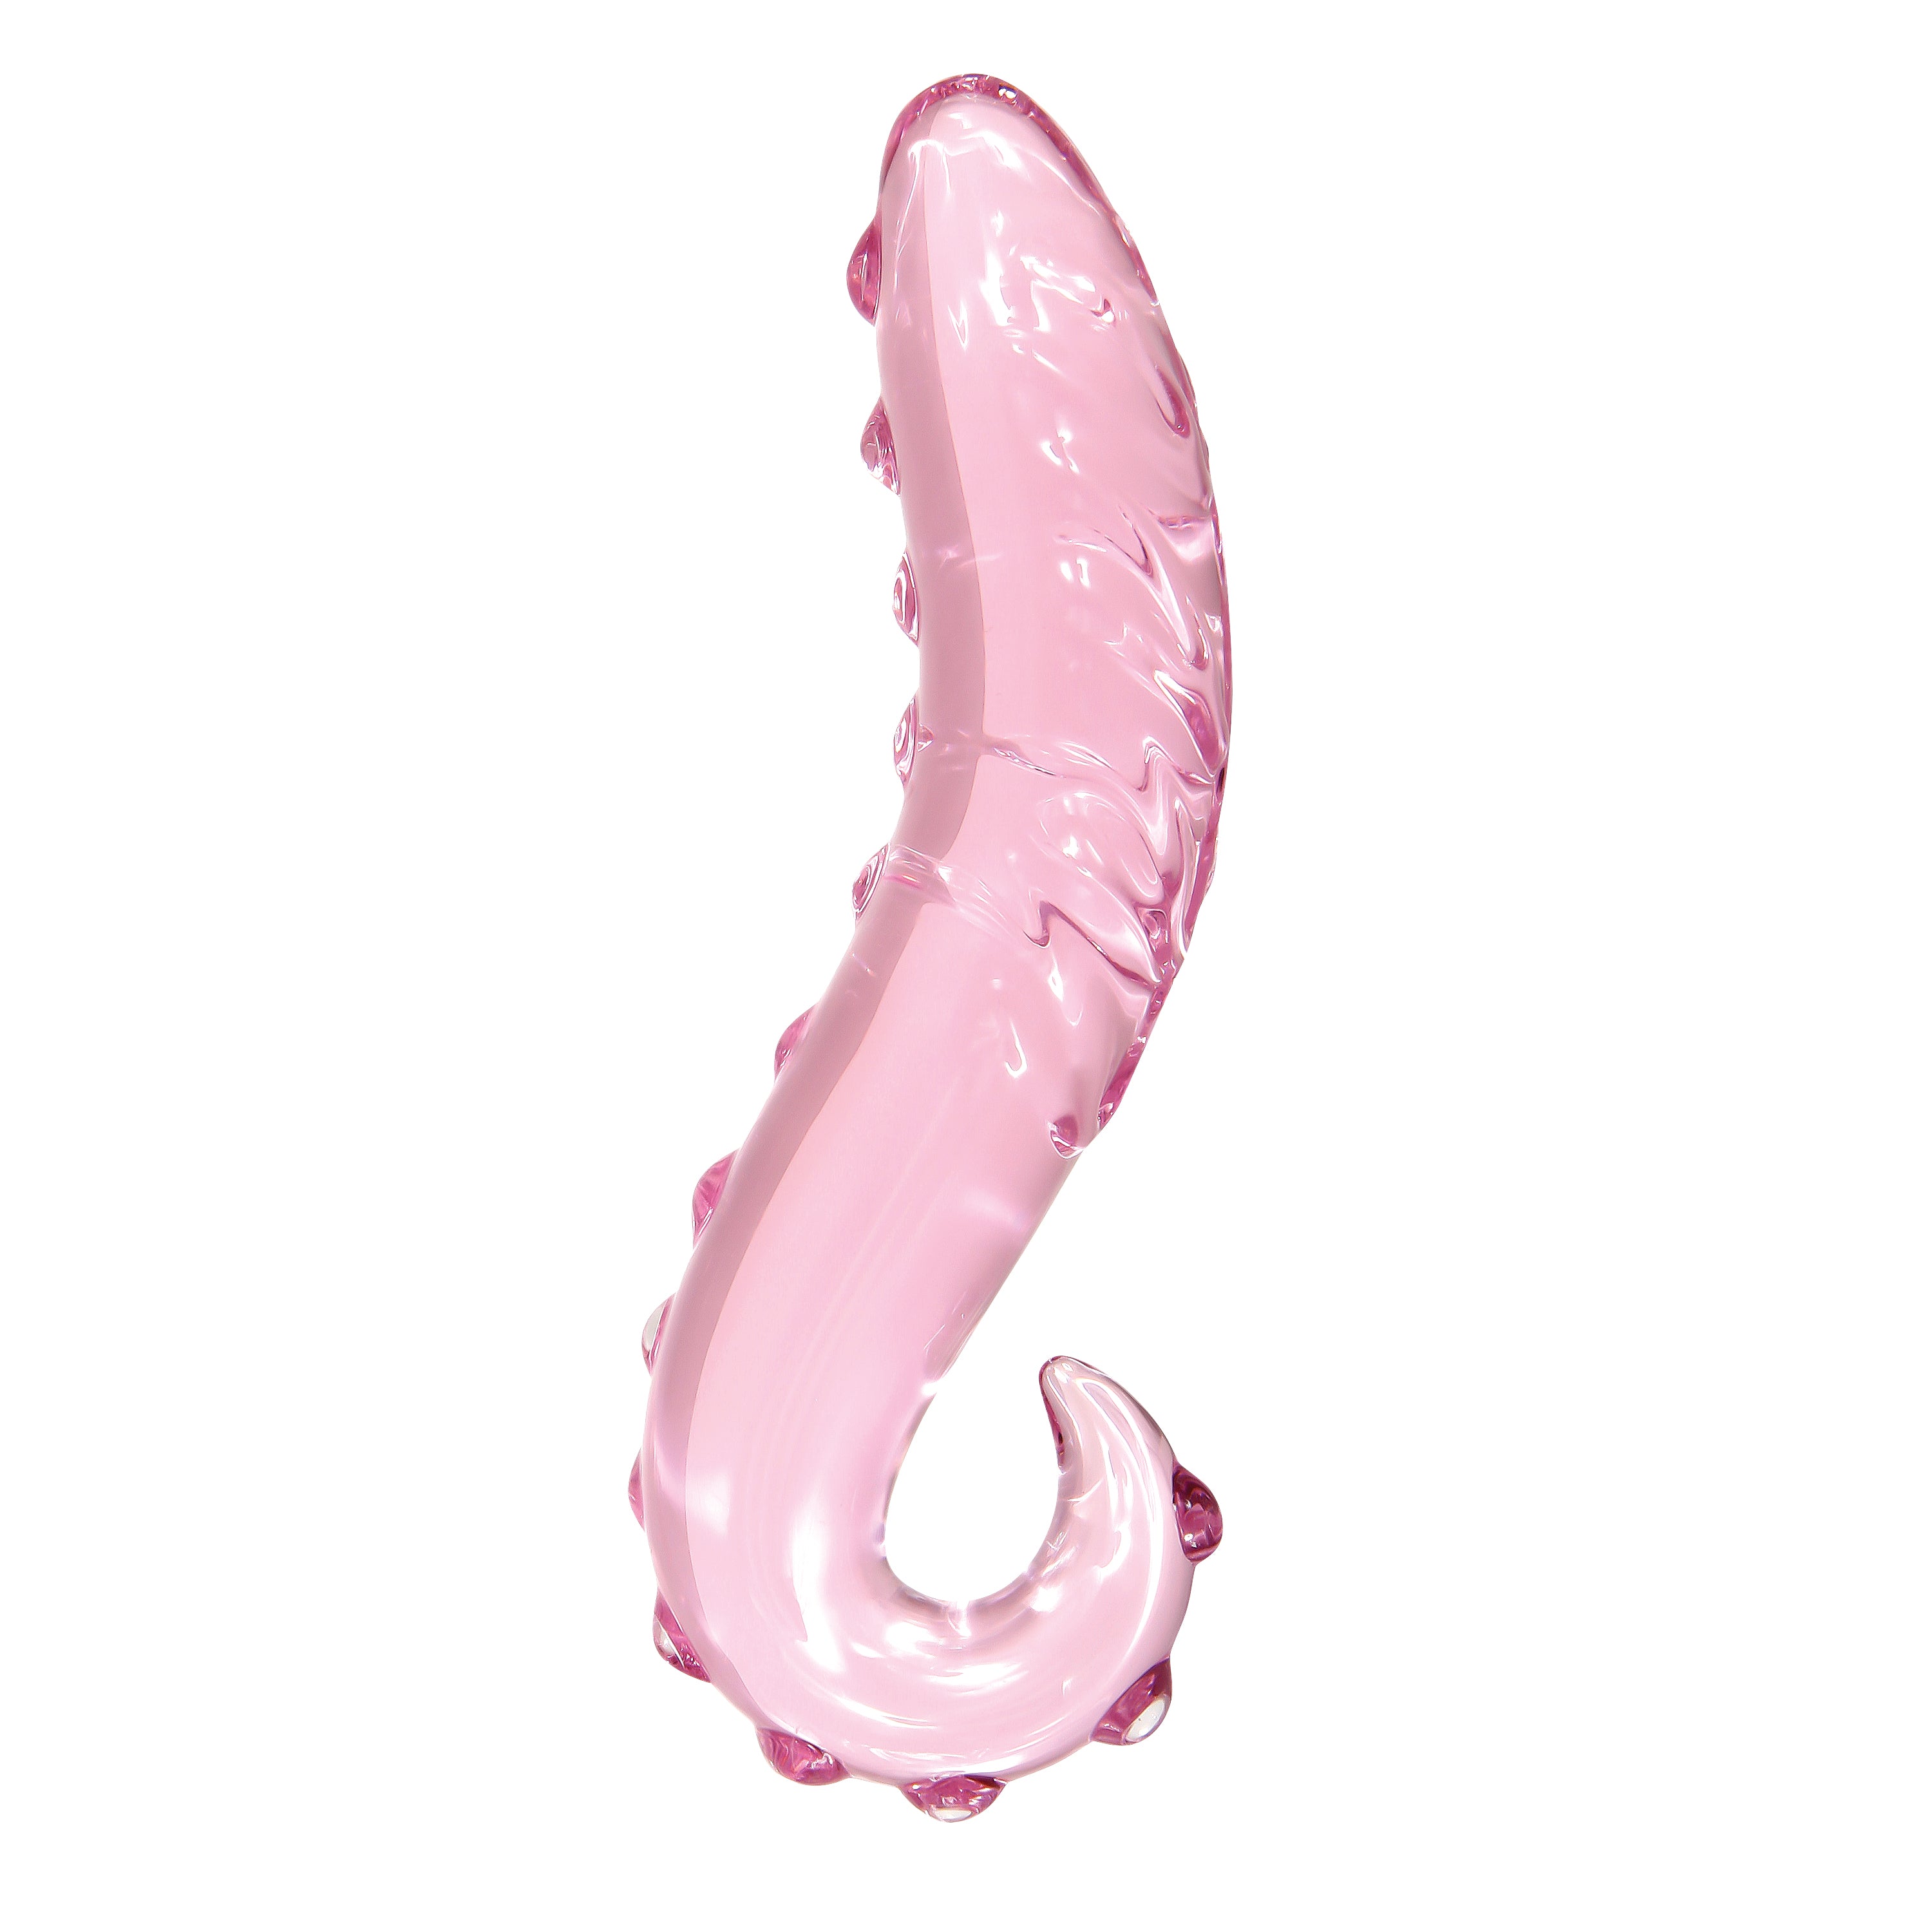 Glass and Metal Sex Toys Fascinations FunLove Adult Store